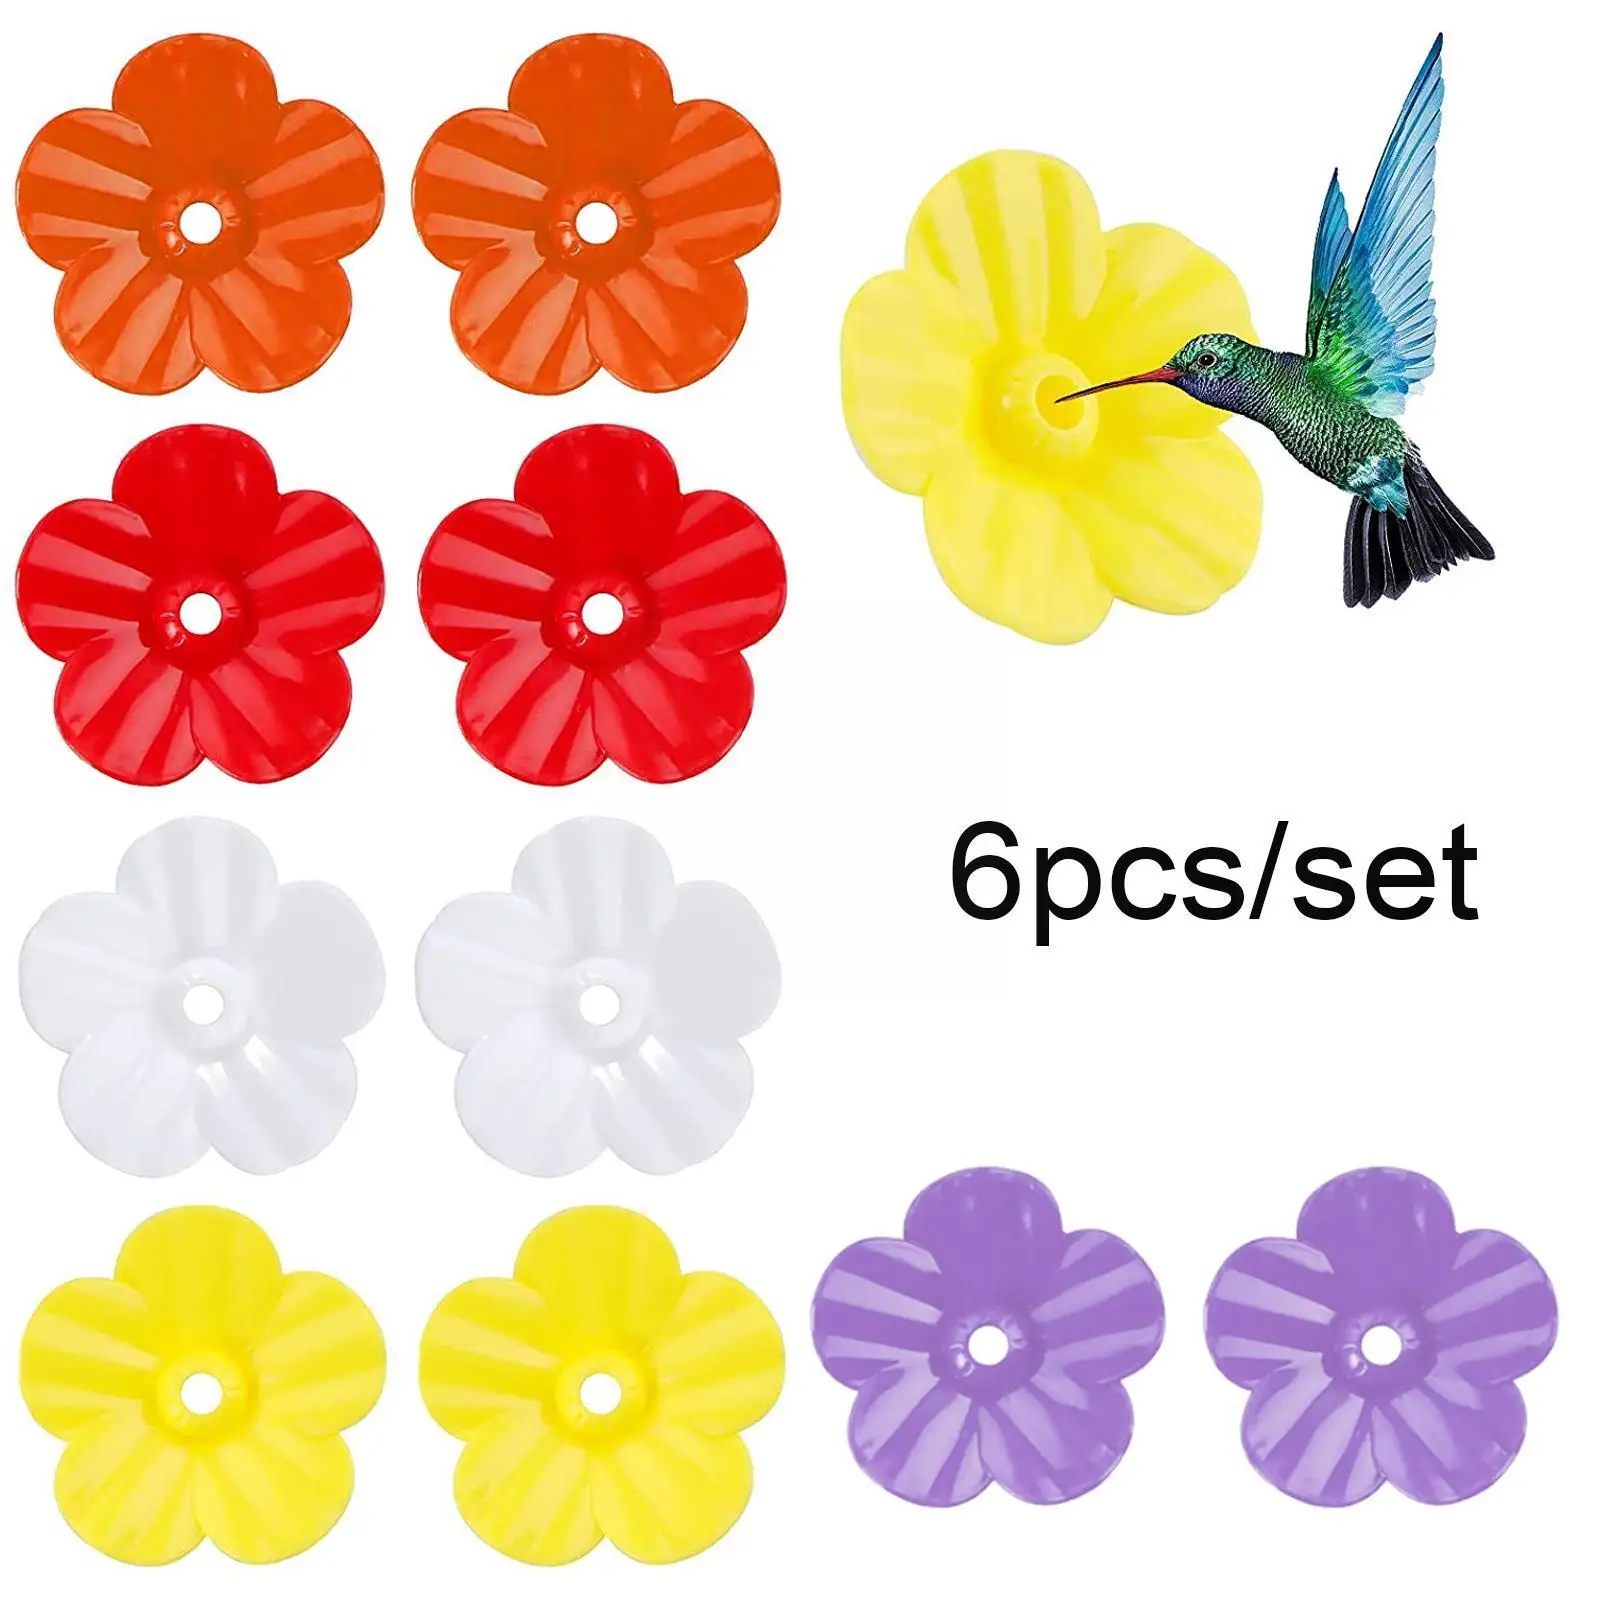 Flowers Outdoor Plastic Feeding Ports Replacement Parts For Feeder Hanging Use Supply F8j2